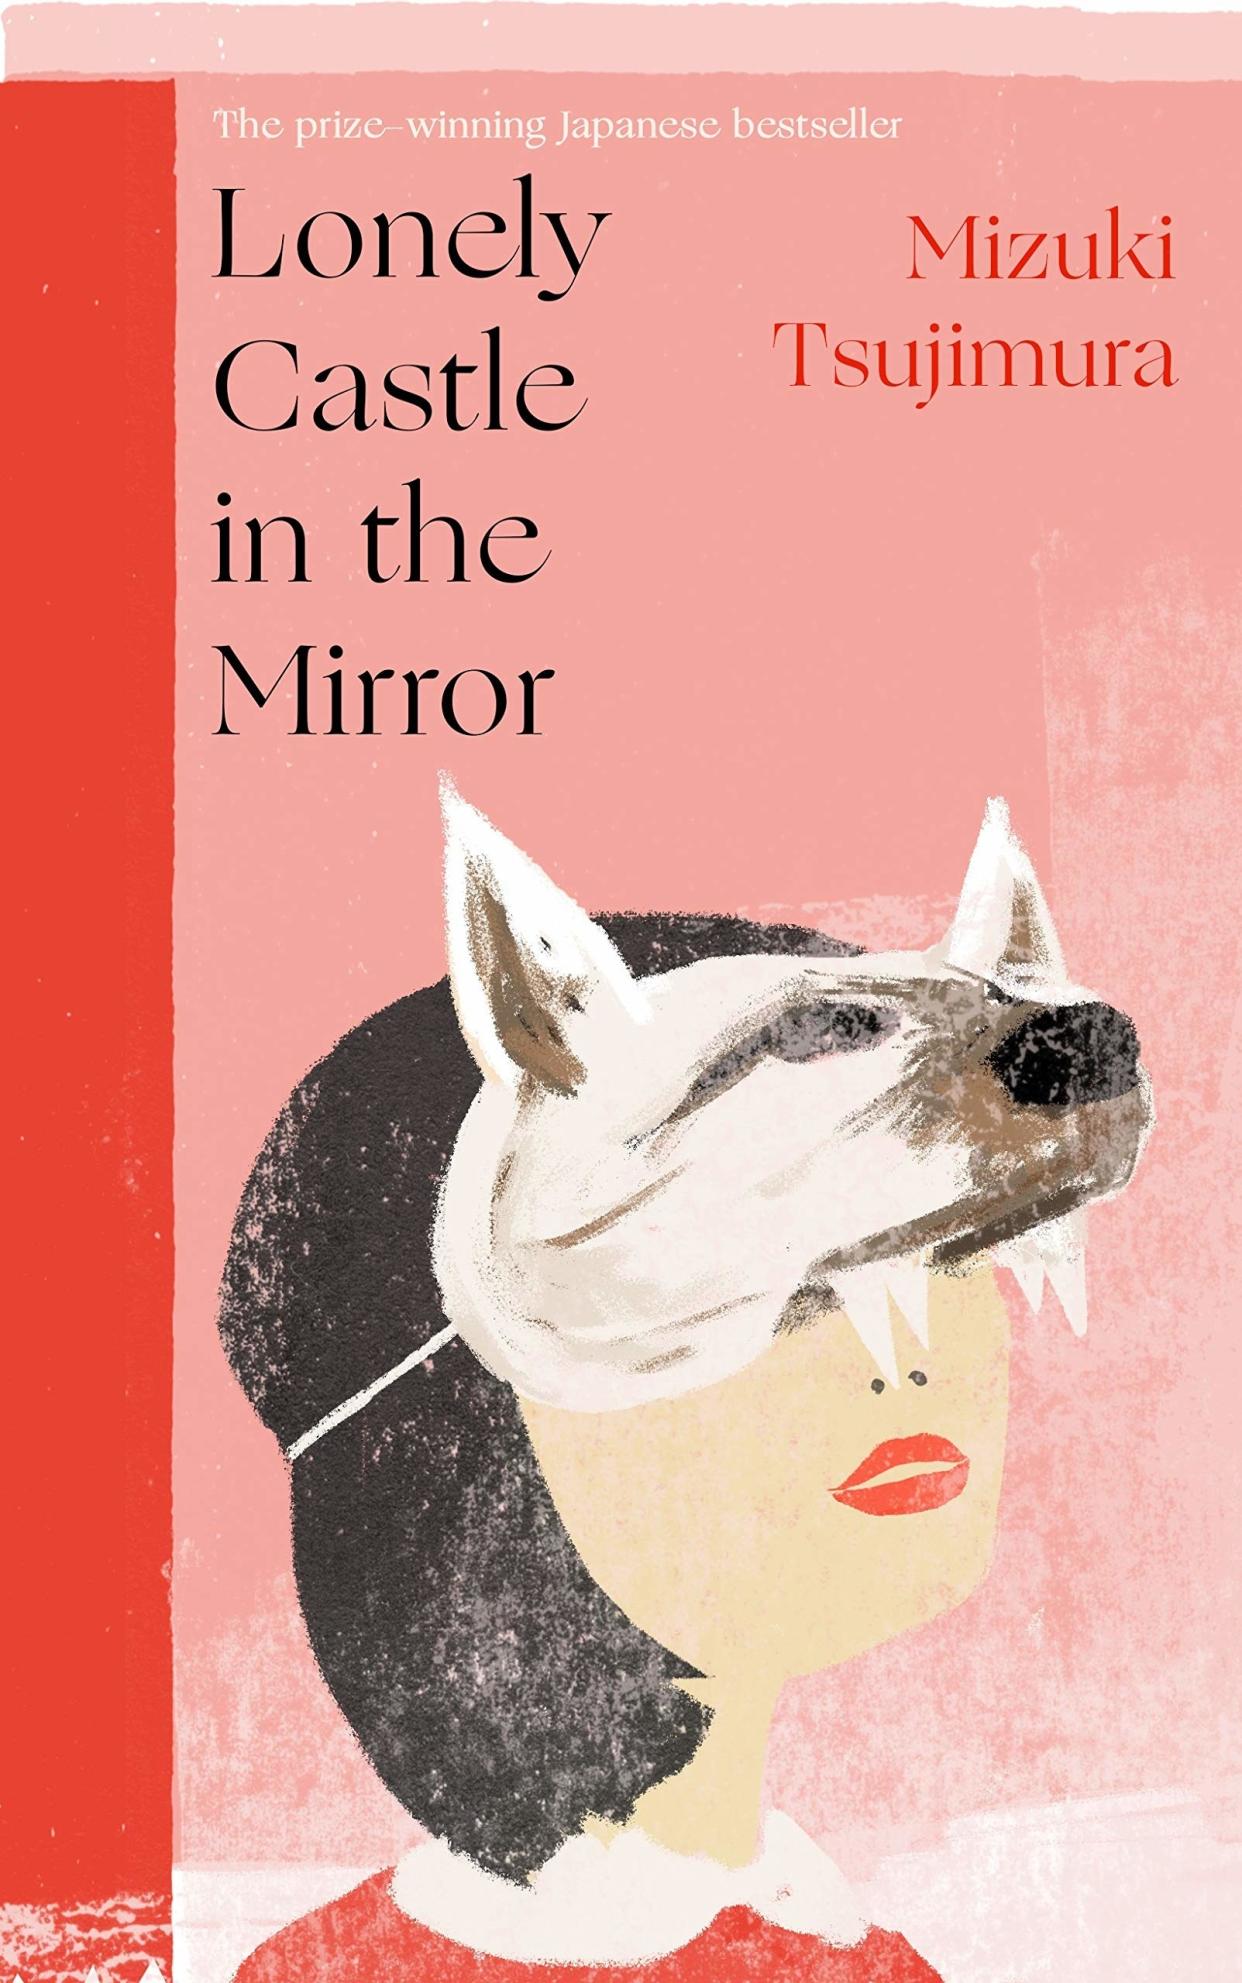 Book cover of "lonely castle in the mirror"